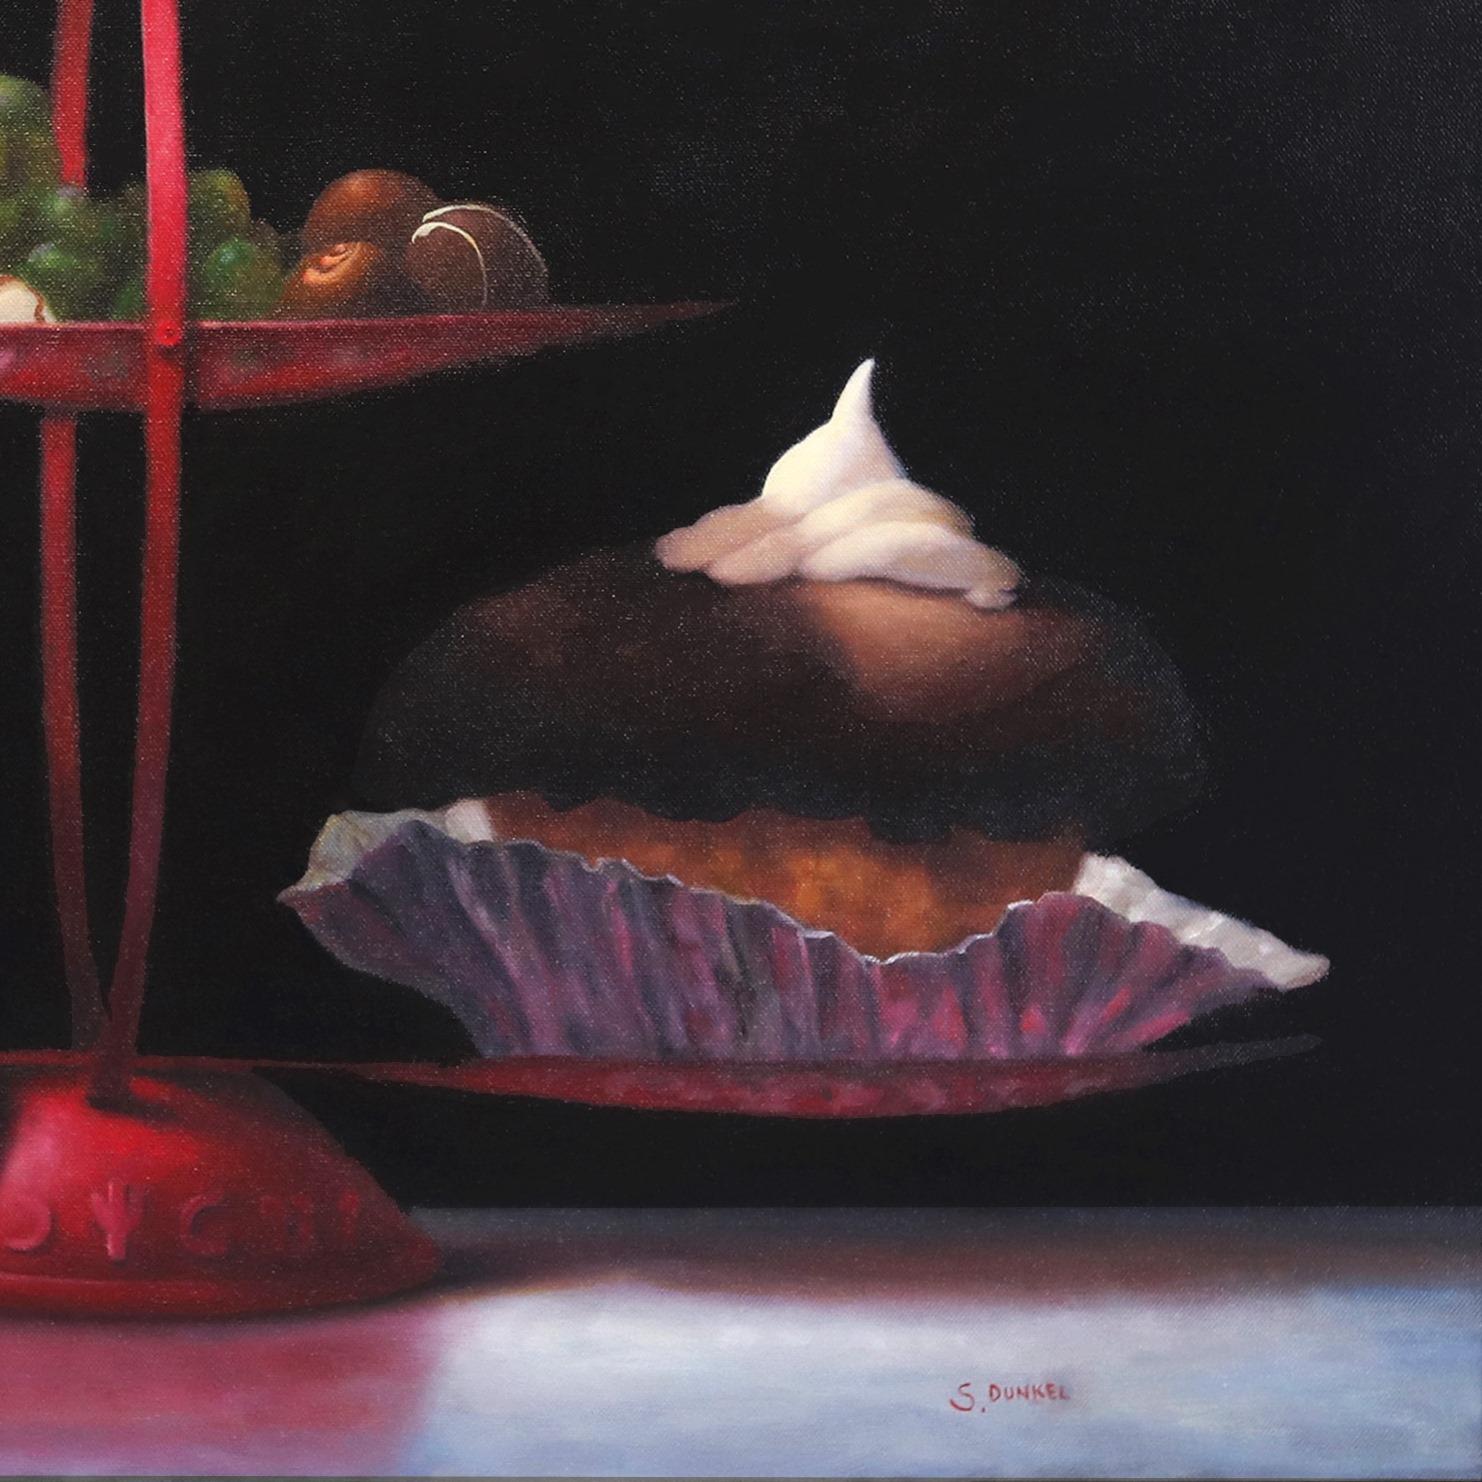 Chinese Desserts - Photorealist Fruit Tart Grapes Cupcake Colorful Oil Painting  For Sale 2